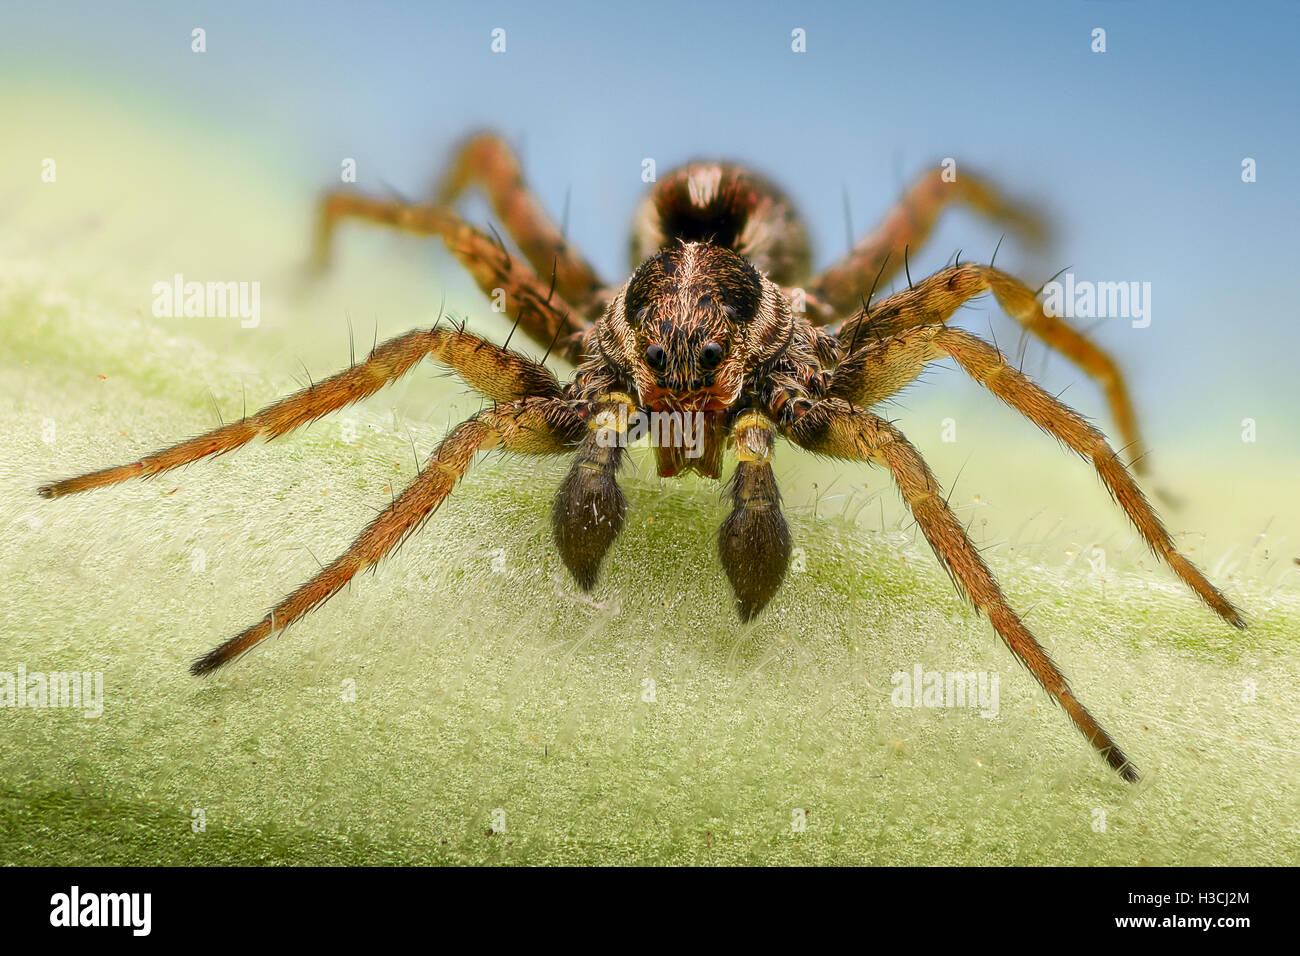 Extreme magnification - Spider on a leaf, front view Stock Photo